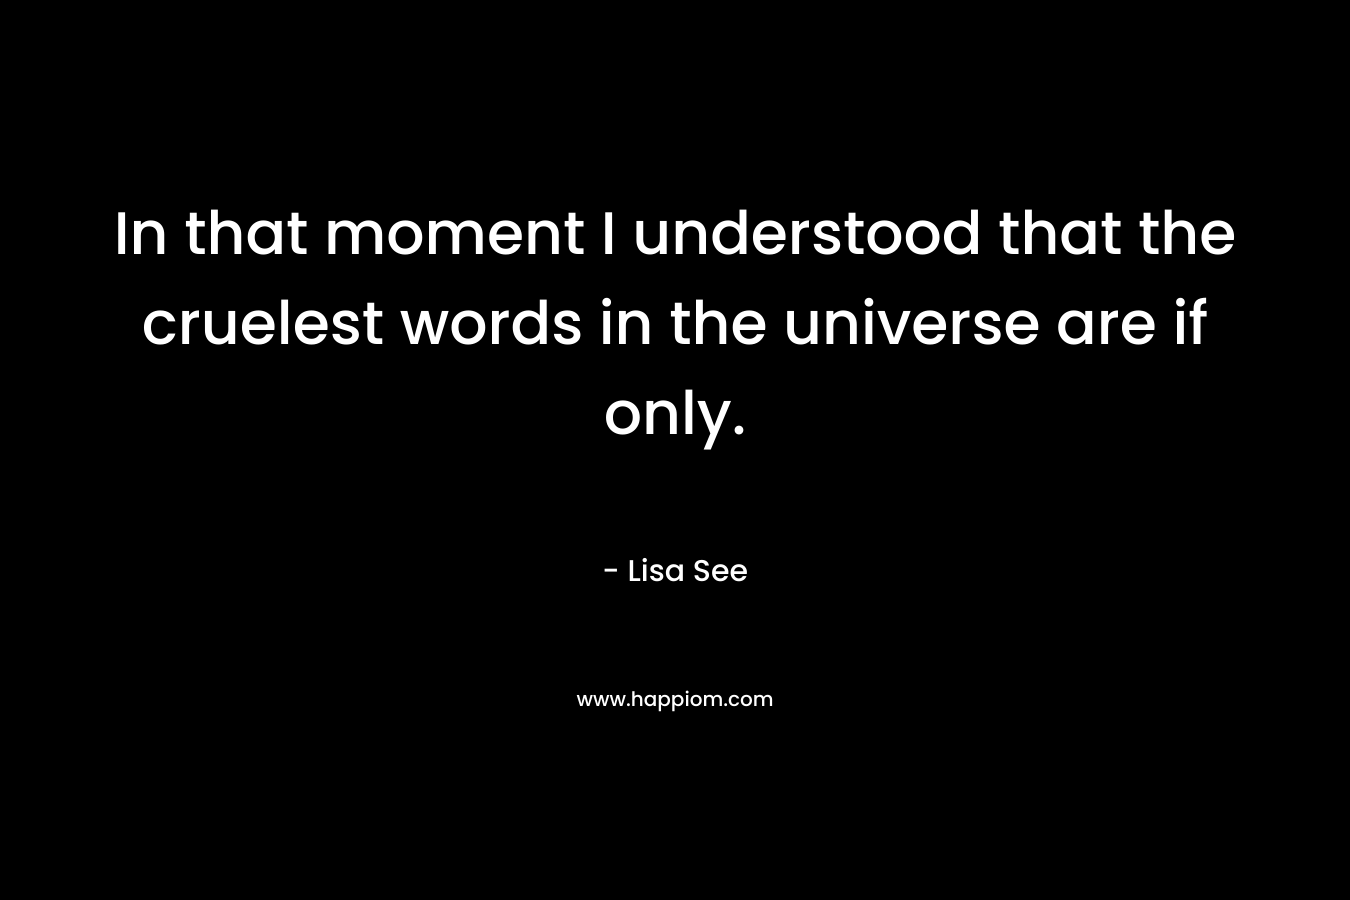 In that moment I understood that the cruelest words in the universe are if only. – Lisa See